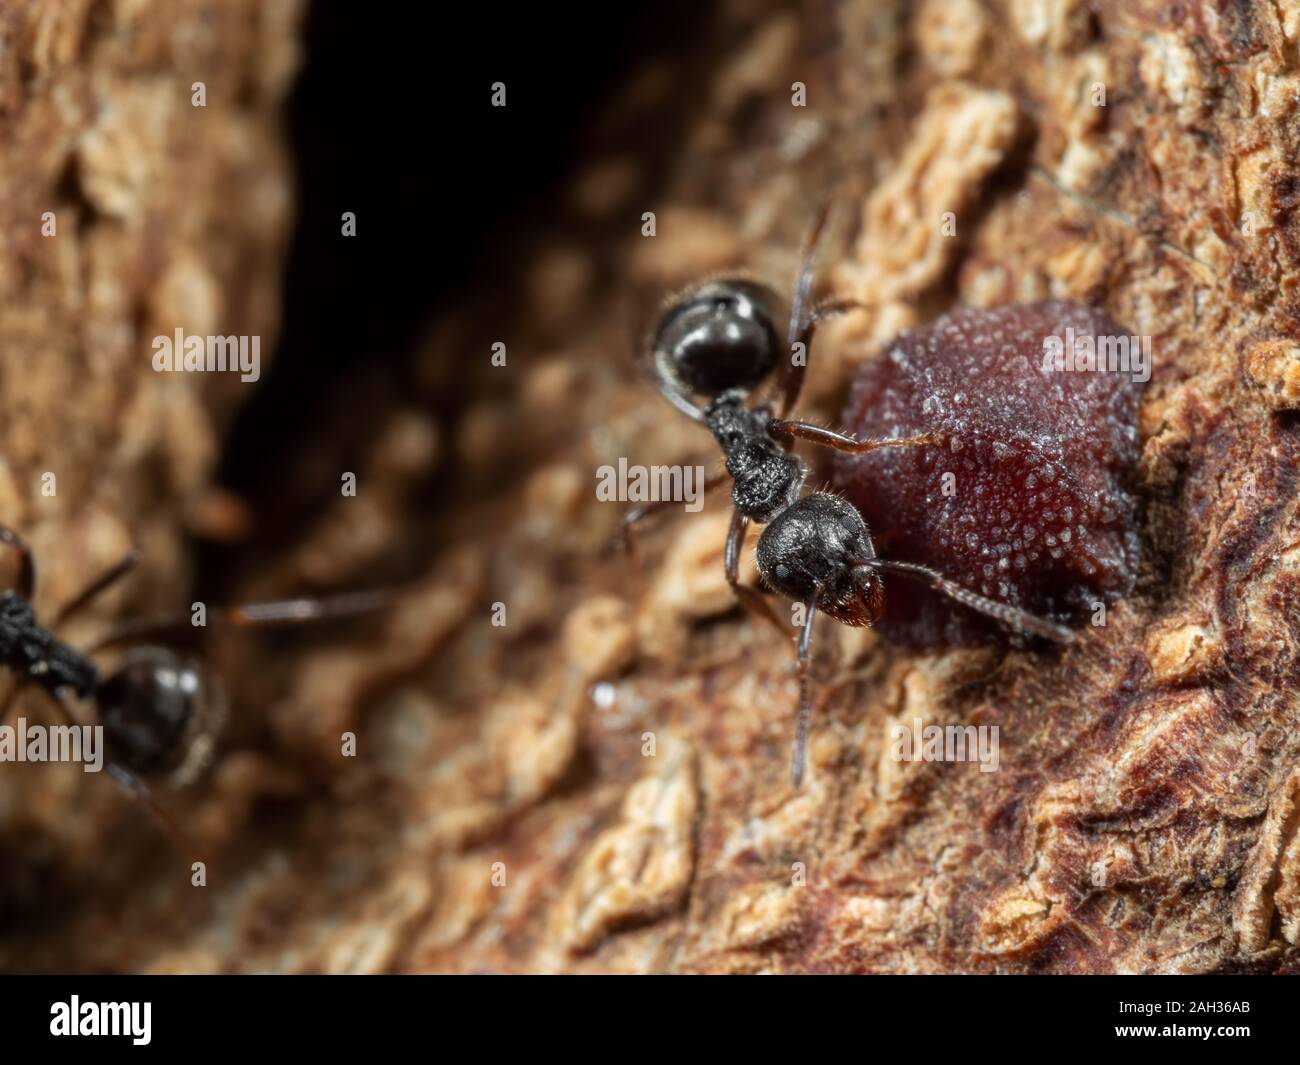 Macro Photography of Black Garden Ant with Scale Insect on Tree Bark Stock Photo